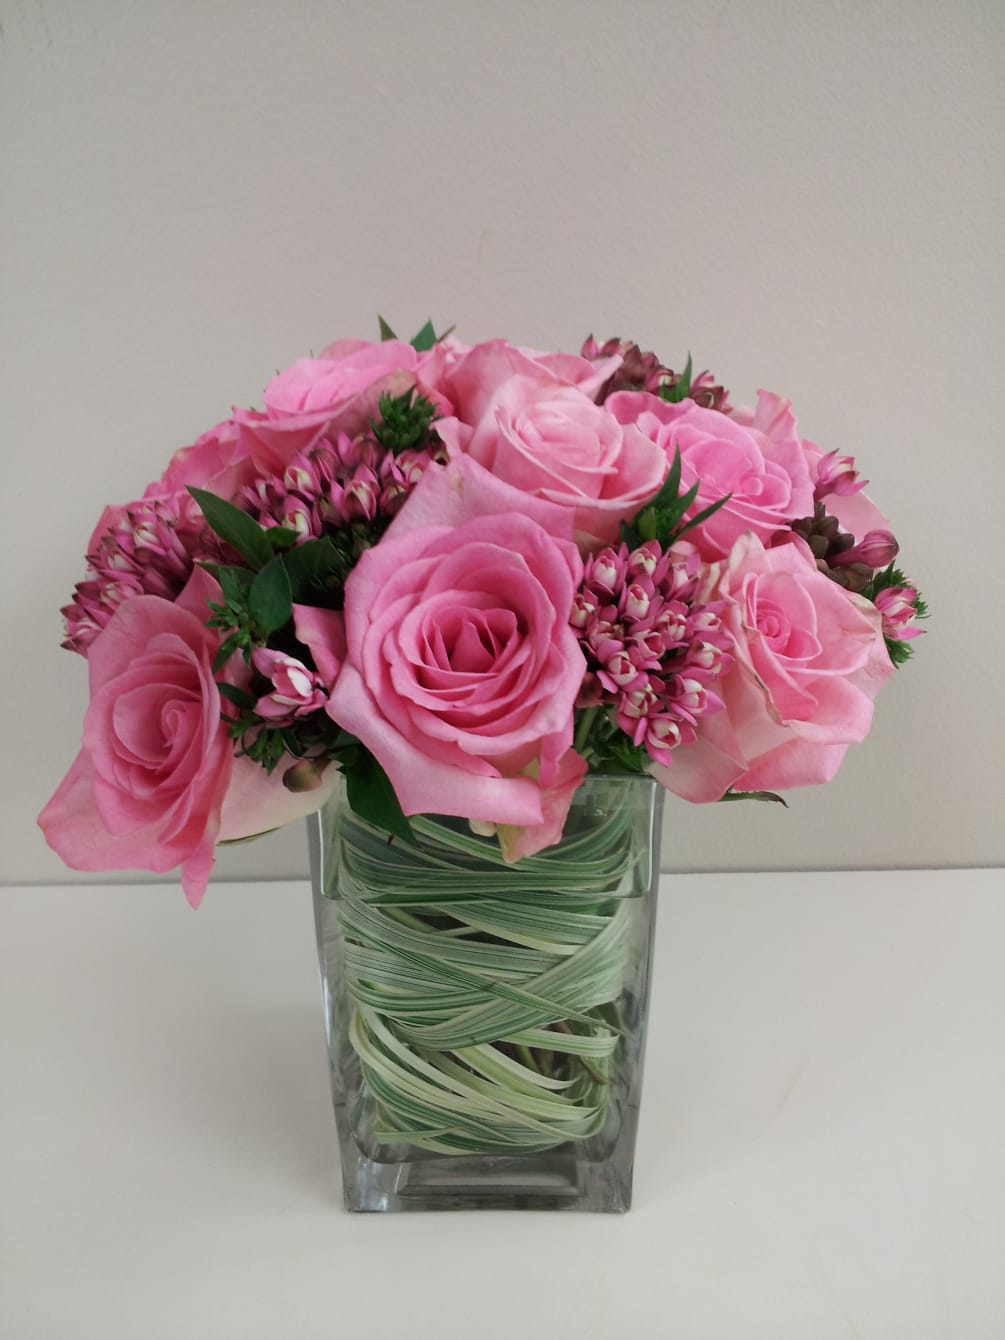 A sweet and charming arrangement featuring premium pink roses and complementary florals